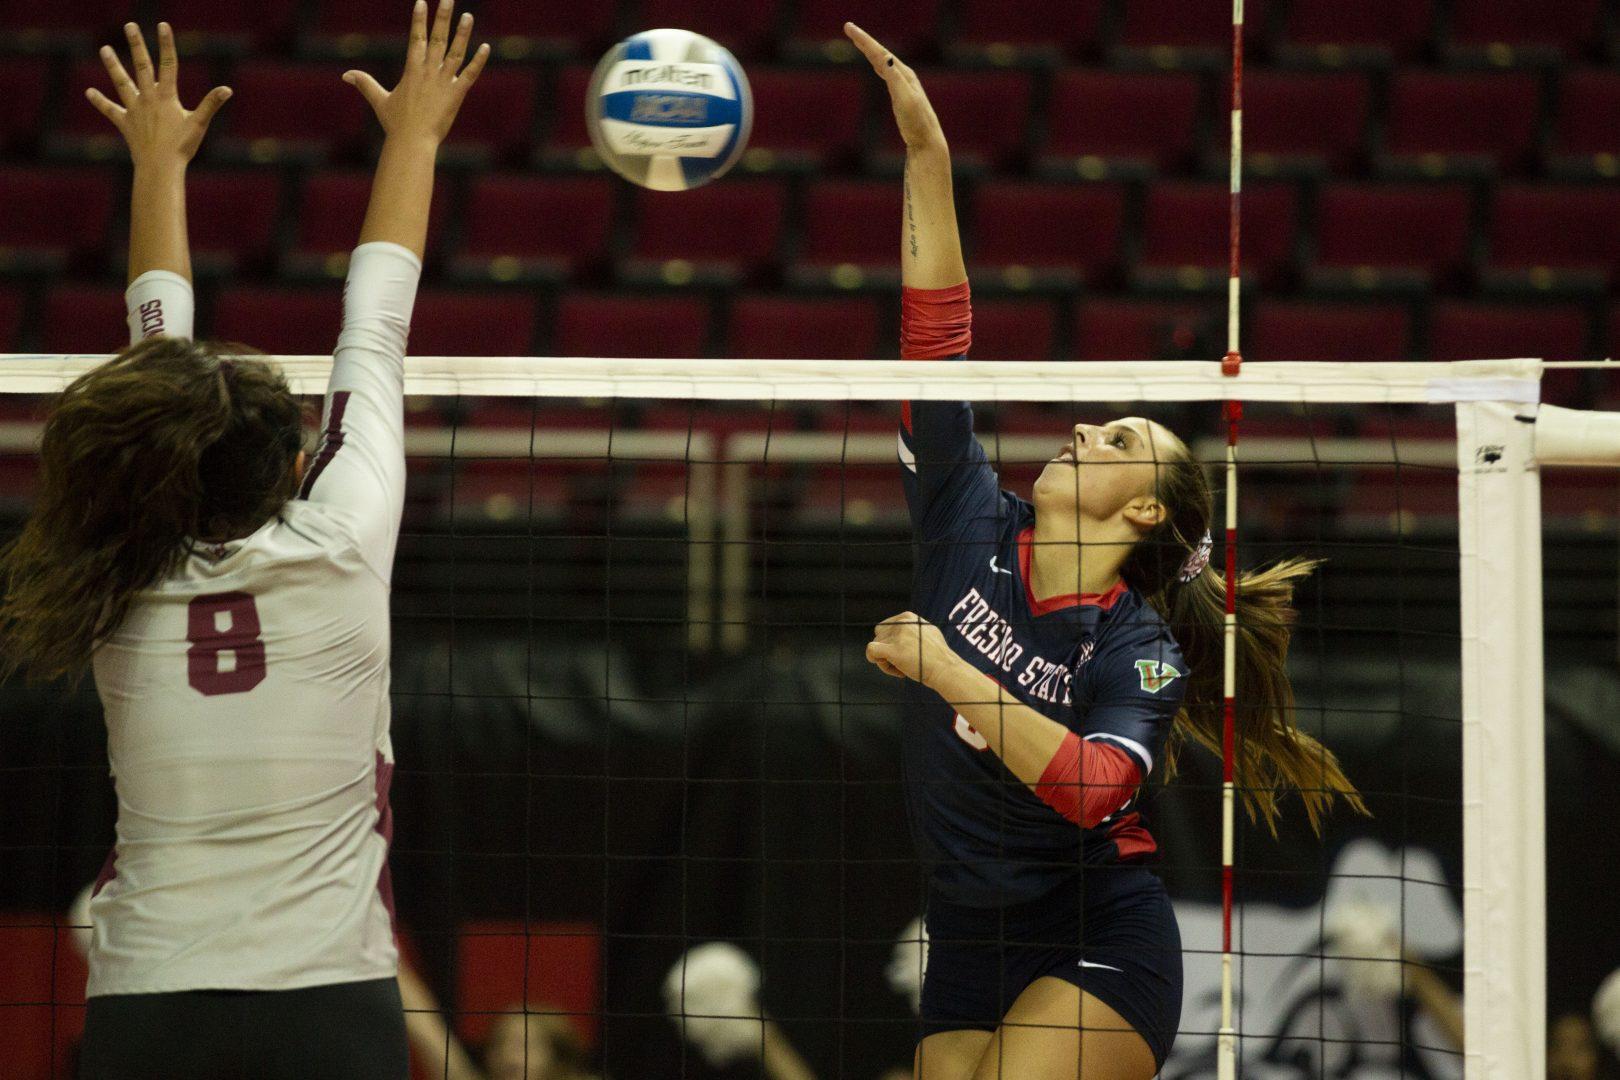 Fresno State outside hitter Desiree Sukhov battles for the the ball during the final match of the Fresno State Invitational against Santa Clara University at the Save Mart Center on Friday, Sept. 7, 2019. (Jorge Rodriguez/The Collegian)